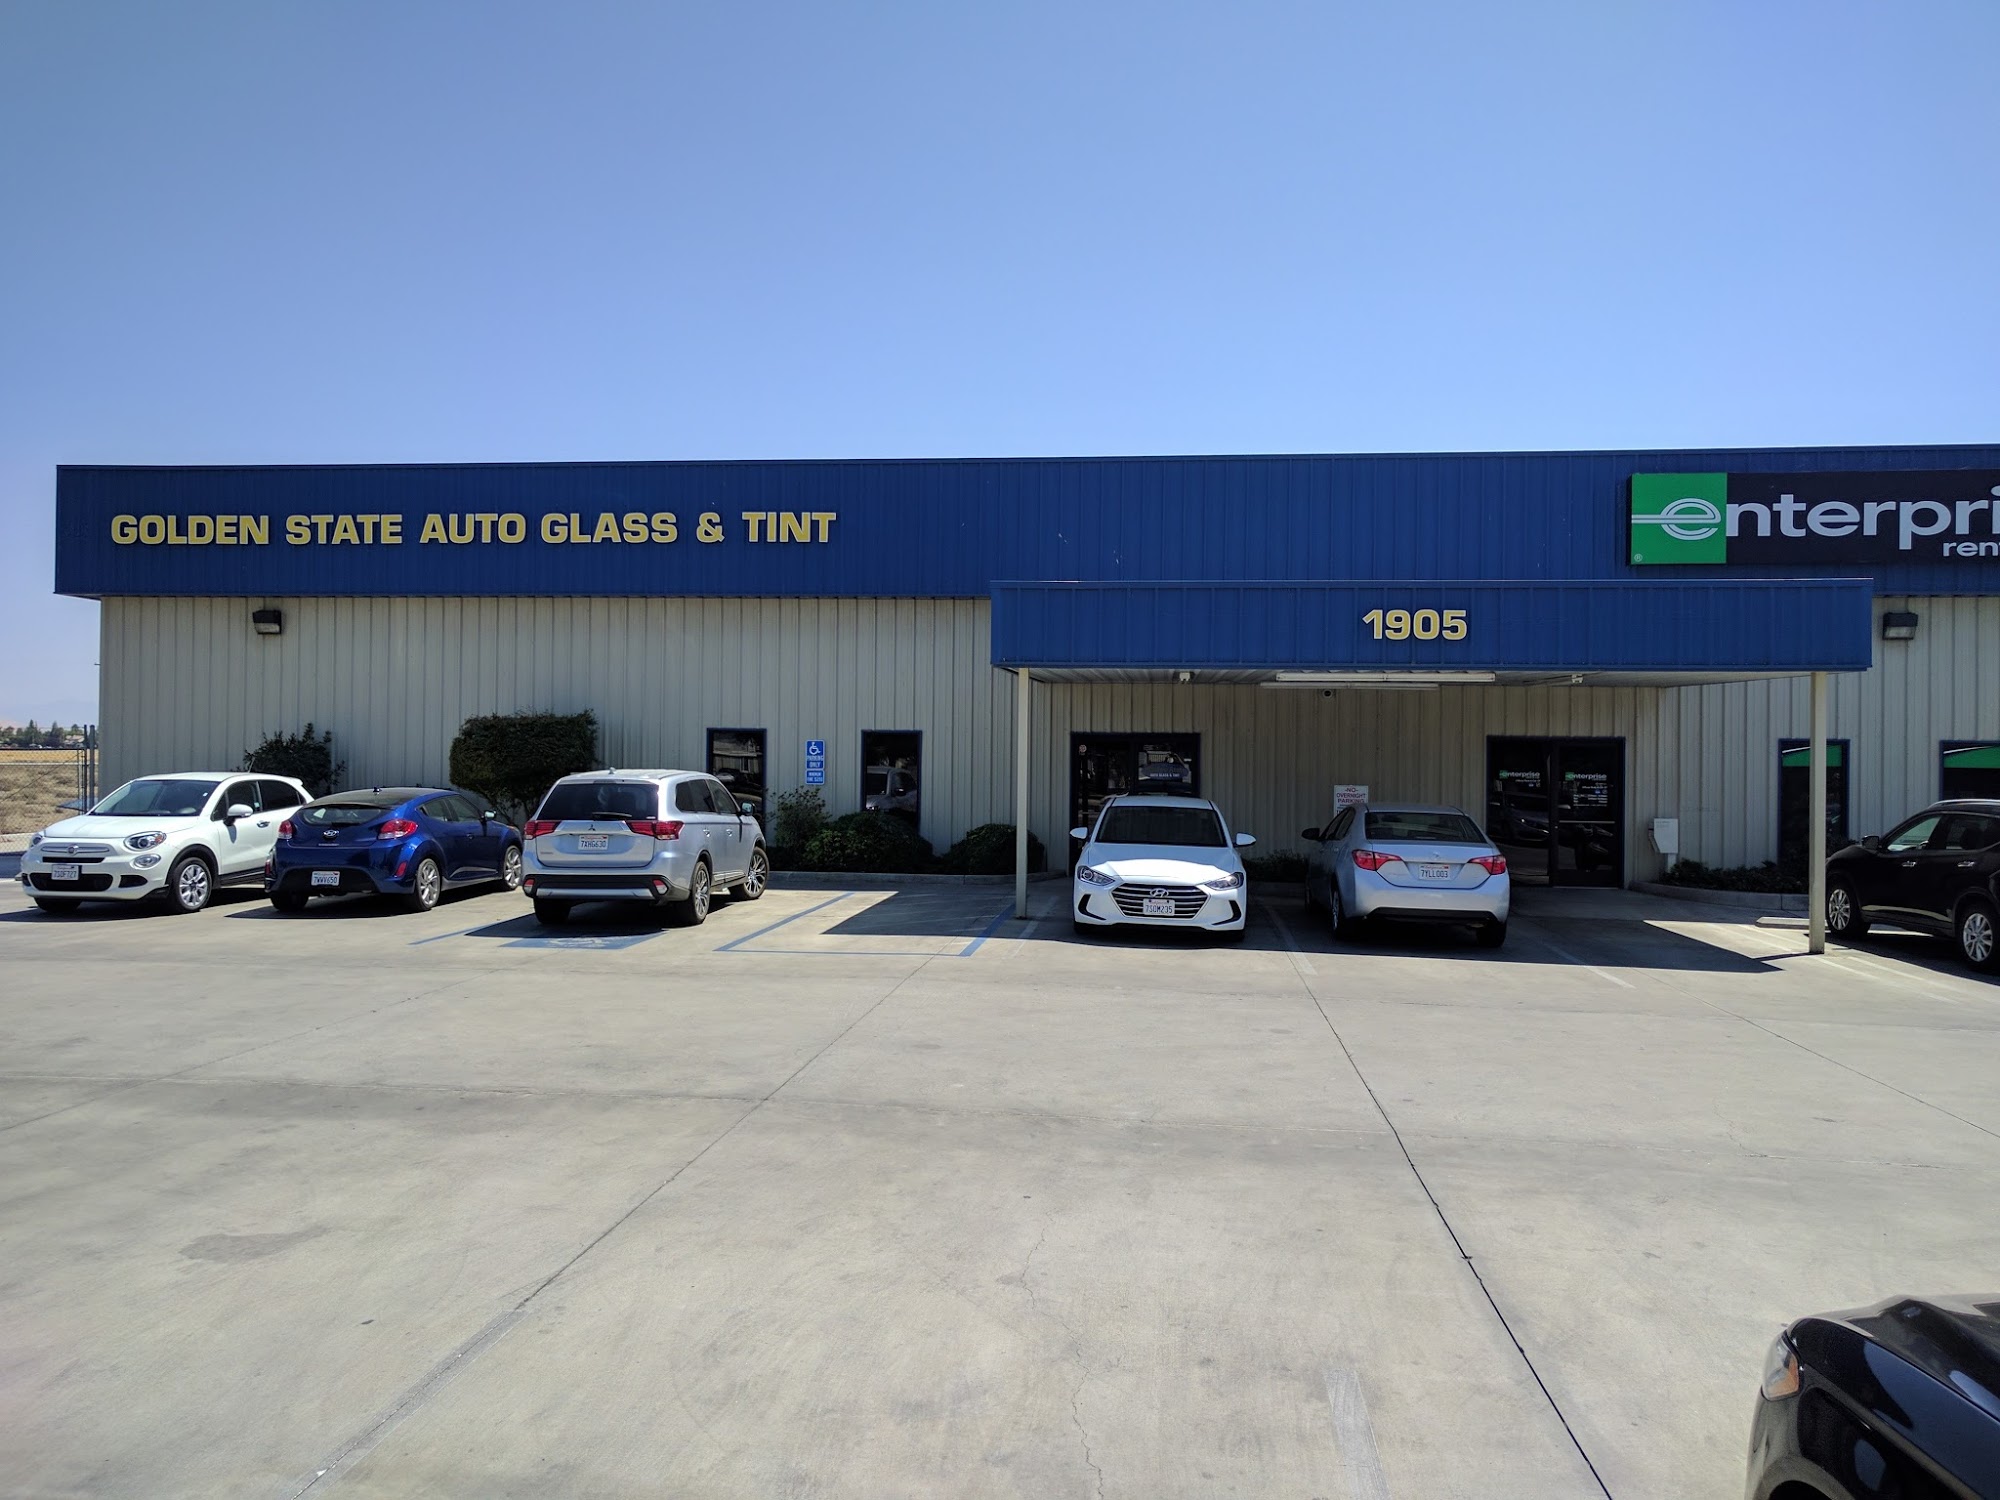 Golden State Auto Glass and Tint